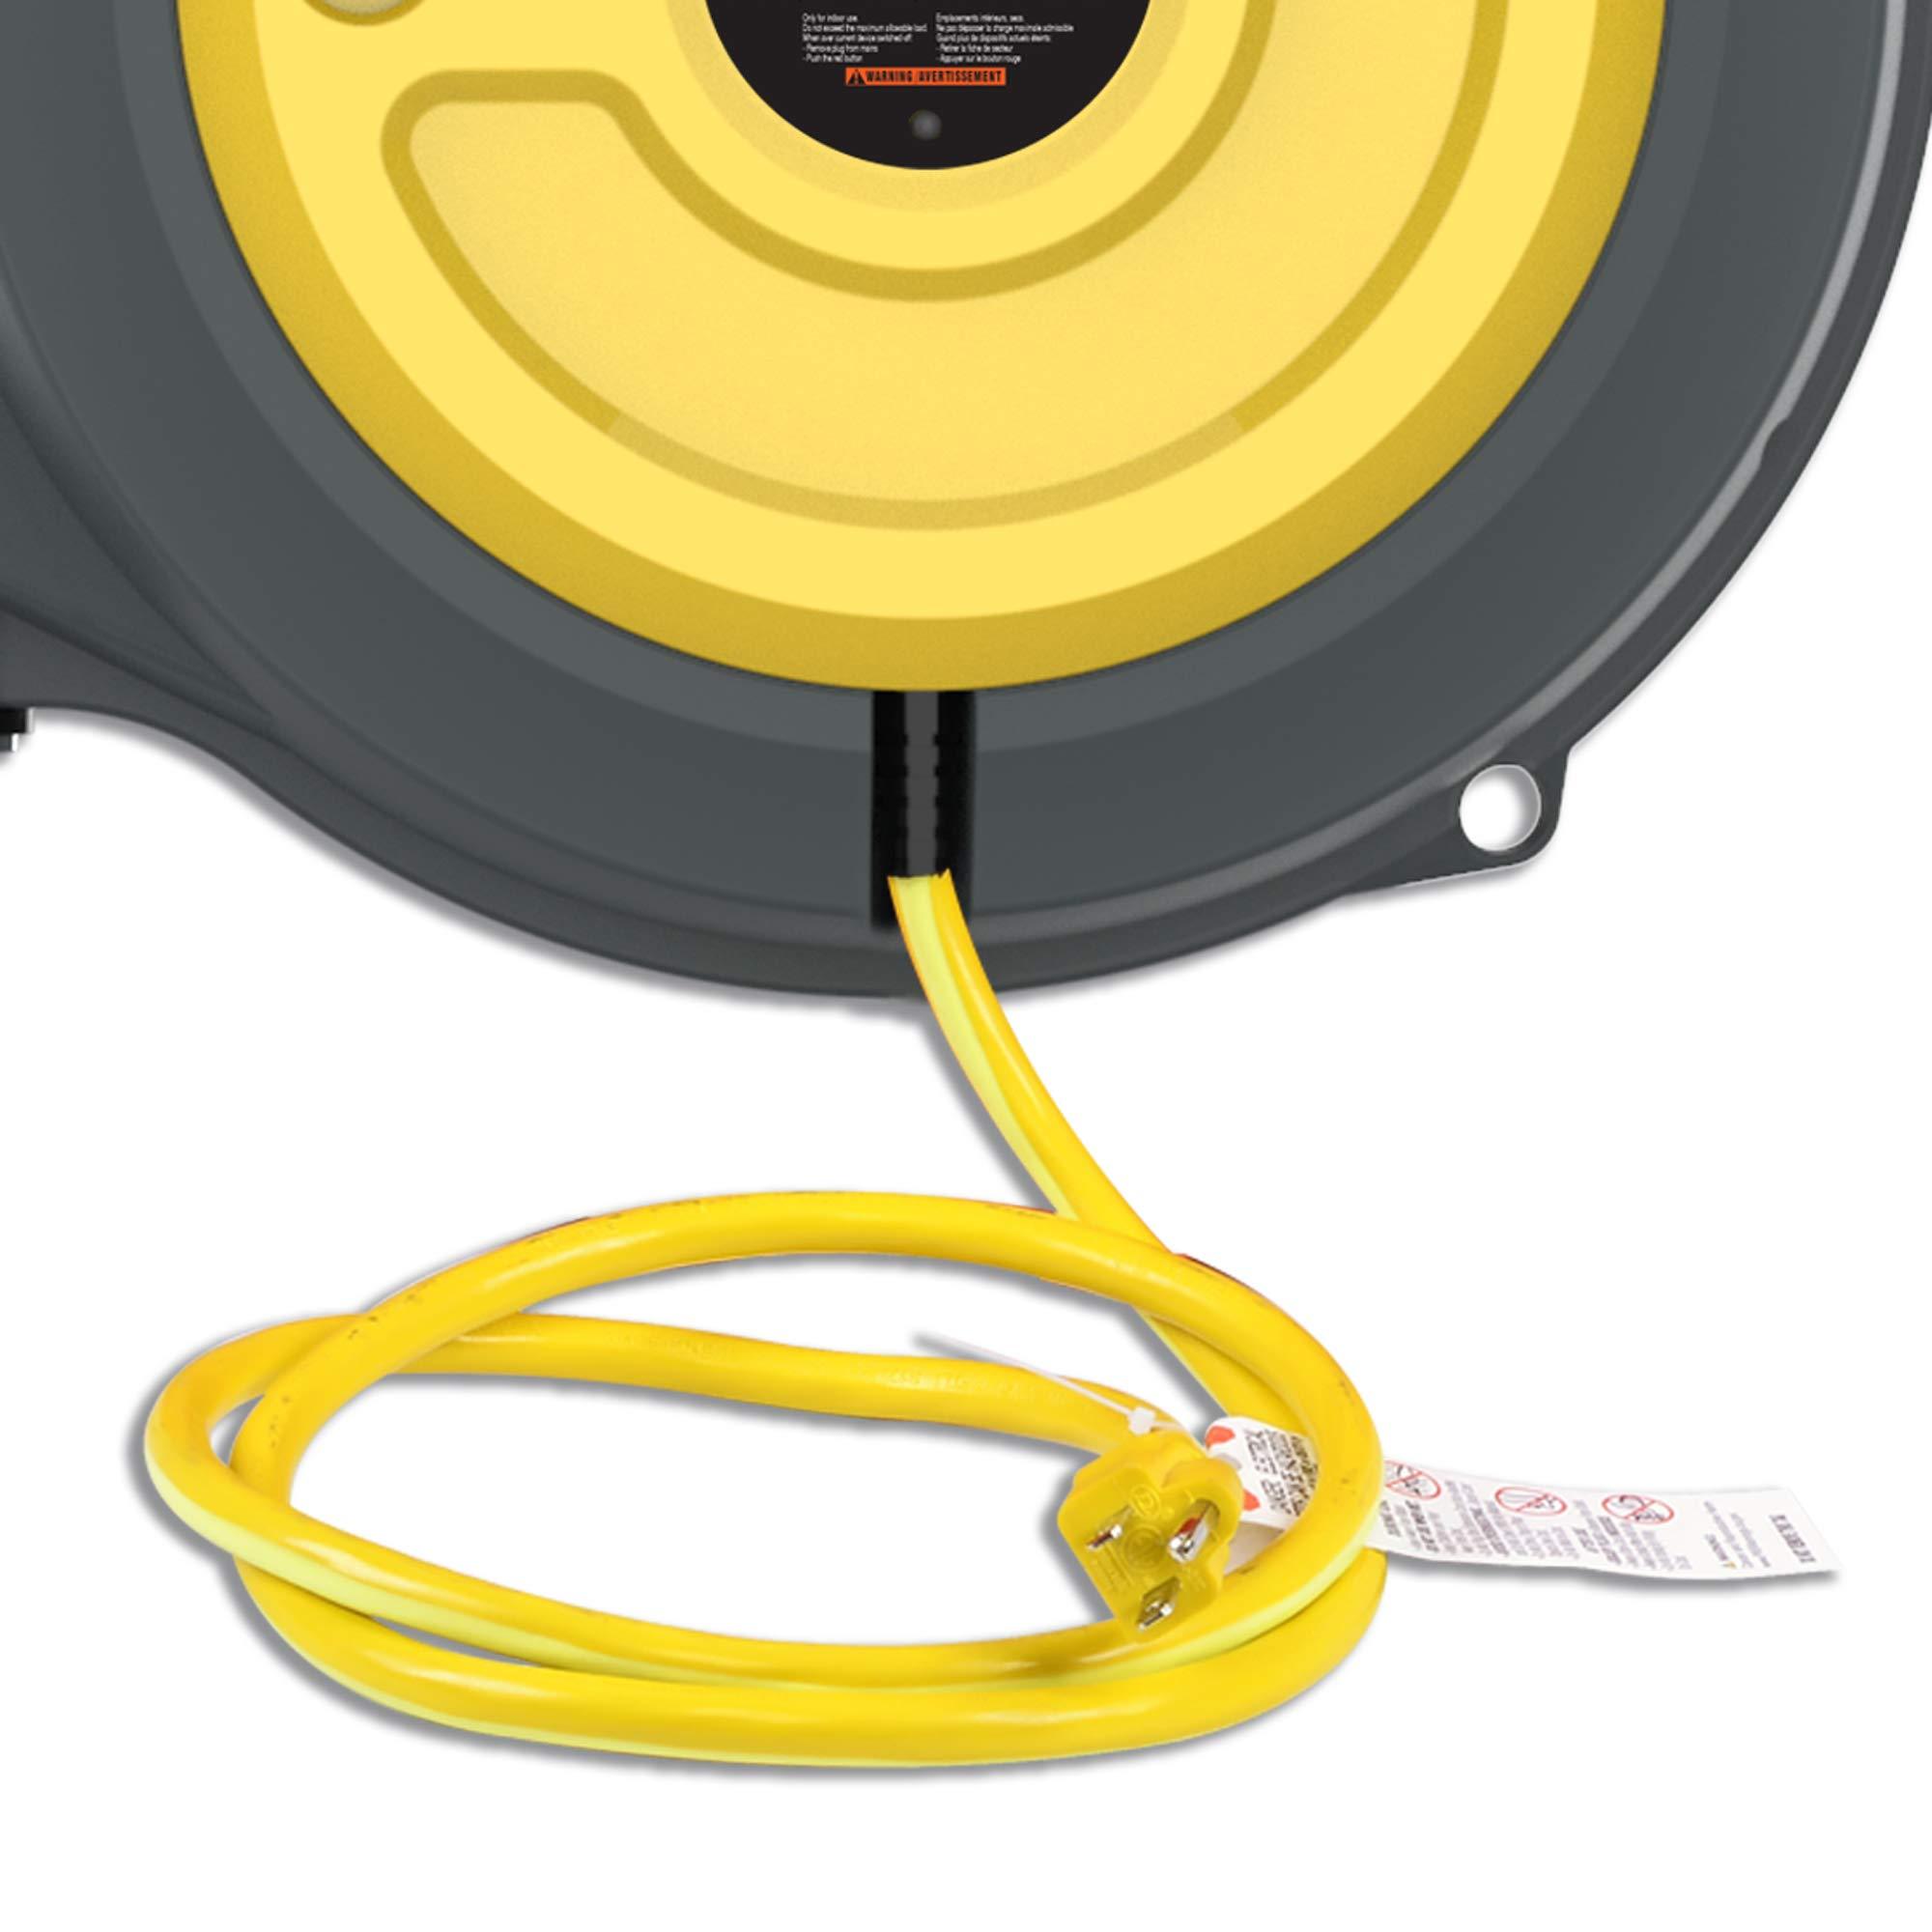 ReelWorks Retractable Extension Cord Reel - 12AWG x 15m (50ft) 3C/SJTOW  Glow Strip Cable with Light-Up Triple Tap Connector